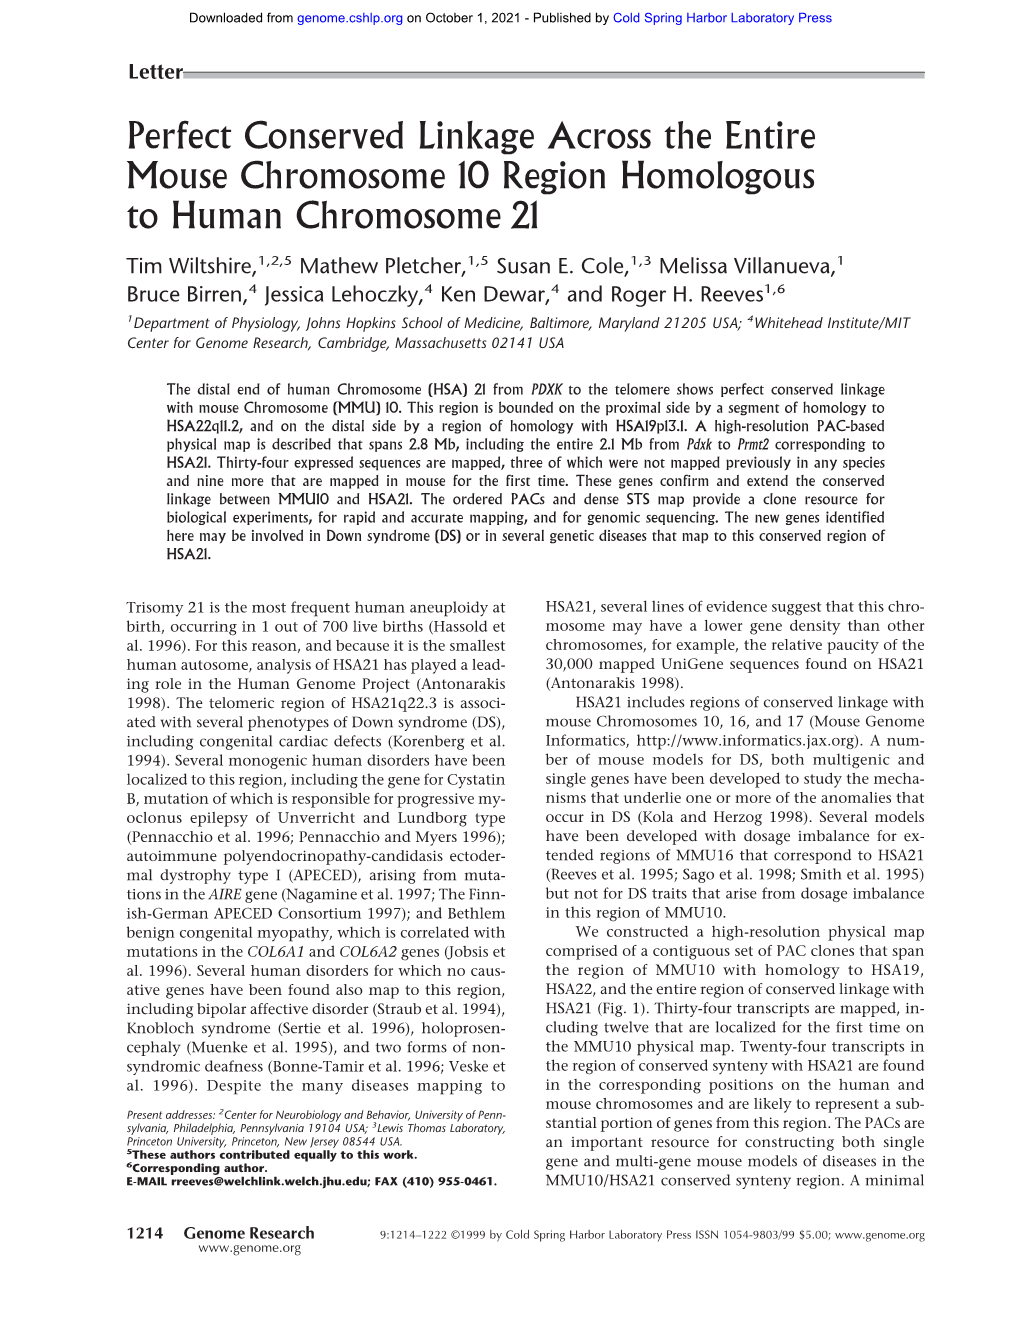 Perfect Conserved Linkage Across the Entire Mouse Chromosome 10 Region Homologous to Human Chromosome 21